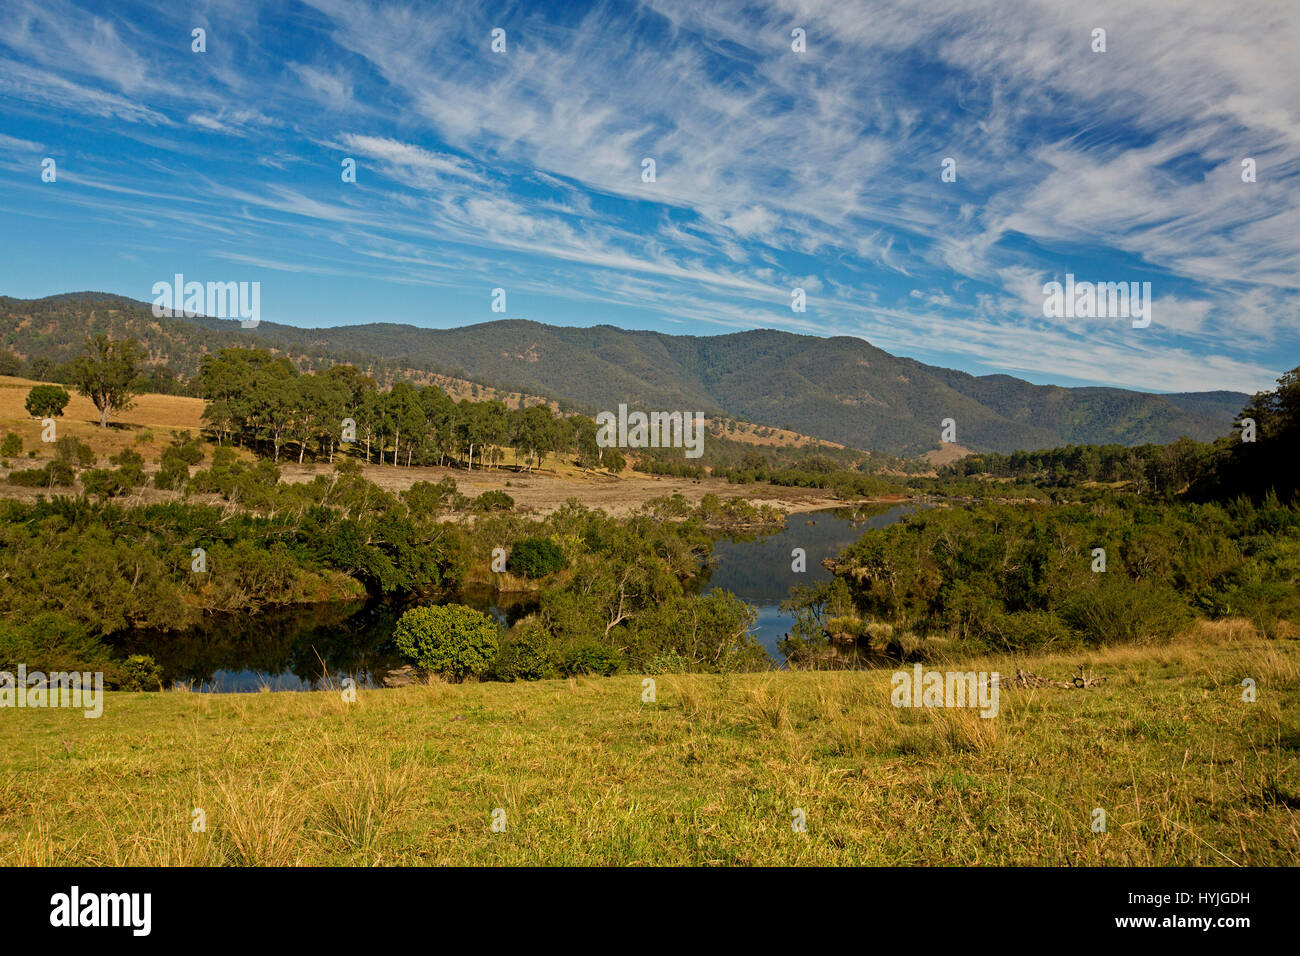 Vast landscape with blue waters of Mann River in valley hemmed by woodlands & peaks of Great Dividing Range under blue sky in northern NSW Australia Stock Photo